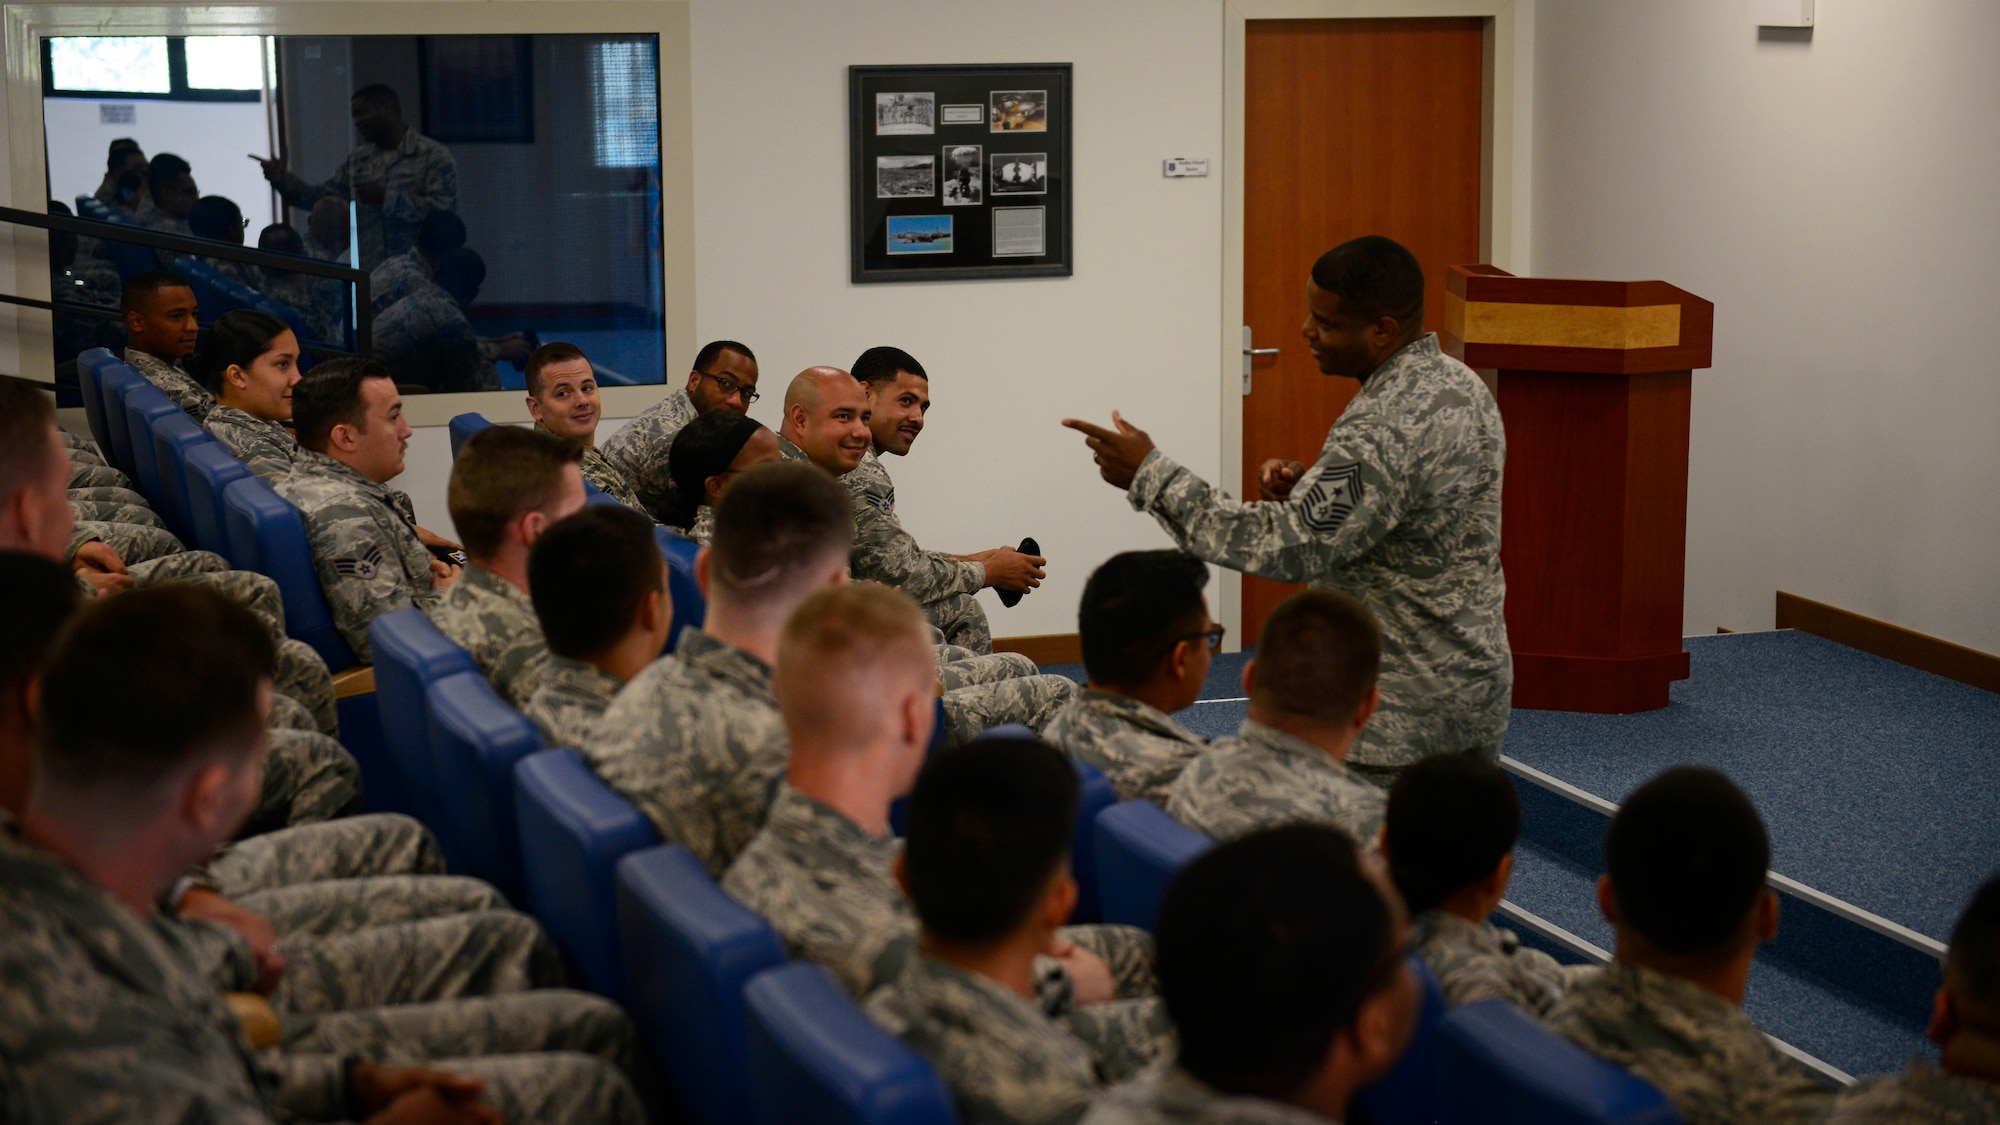 Chief Master Sgt. Phillip L. Easton, U.S. Air Forces in Europe and Air Forces Africa command chief, speaks with Airmen at Airmen Leadership School during a visit to Aviano Air Base, Italy, July 23, 2018. Easton mentioned several key words of advice to the Airmen on what it means to be a front-line supervisor in the Air Force. (U.S. Air Force photo by Staff Sgt. Cary Smith)